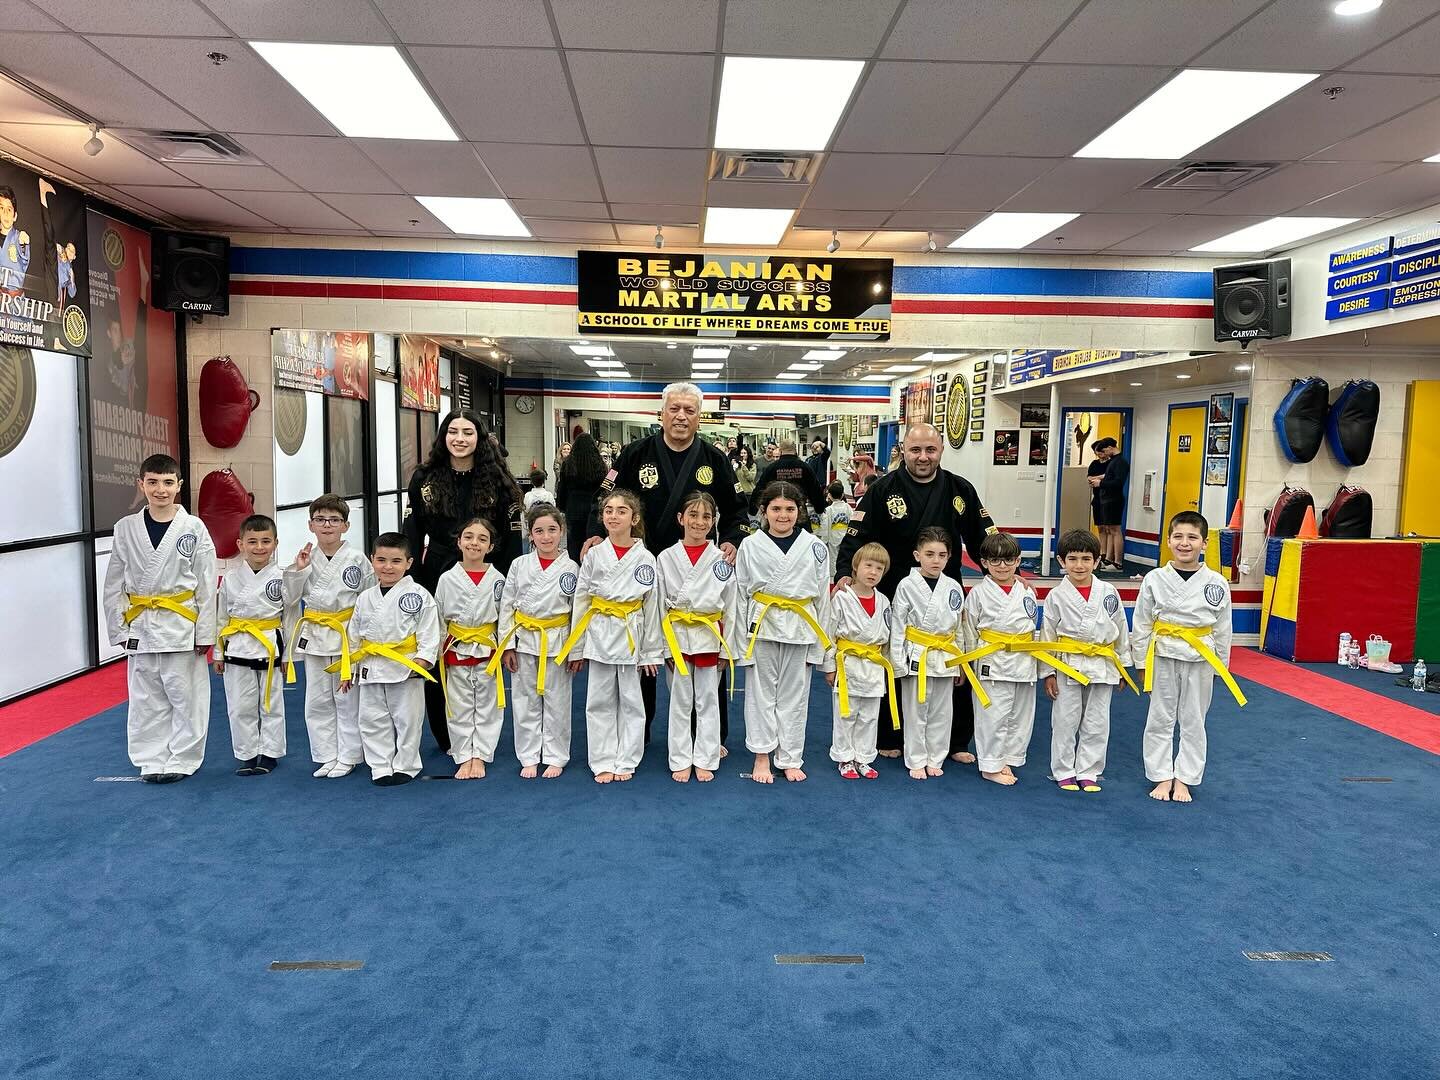 Congratulations to our students for their rank advancement. BEJANIAN MARTIAL ARTS